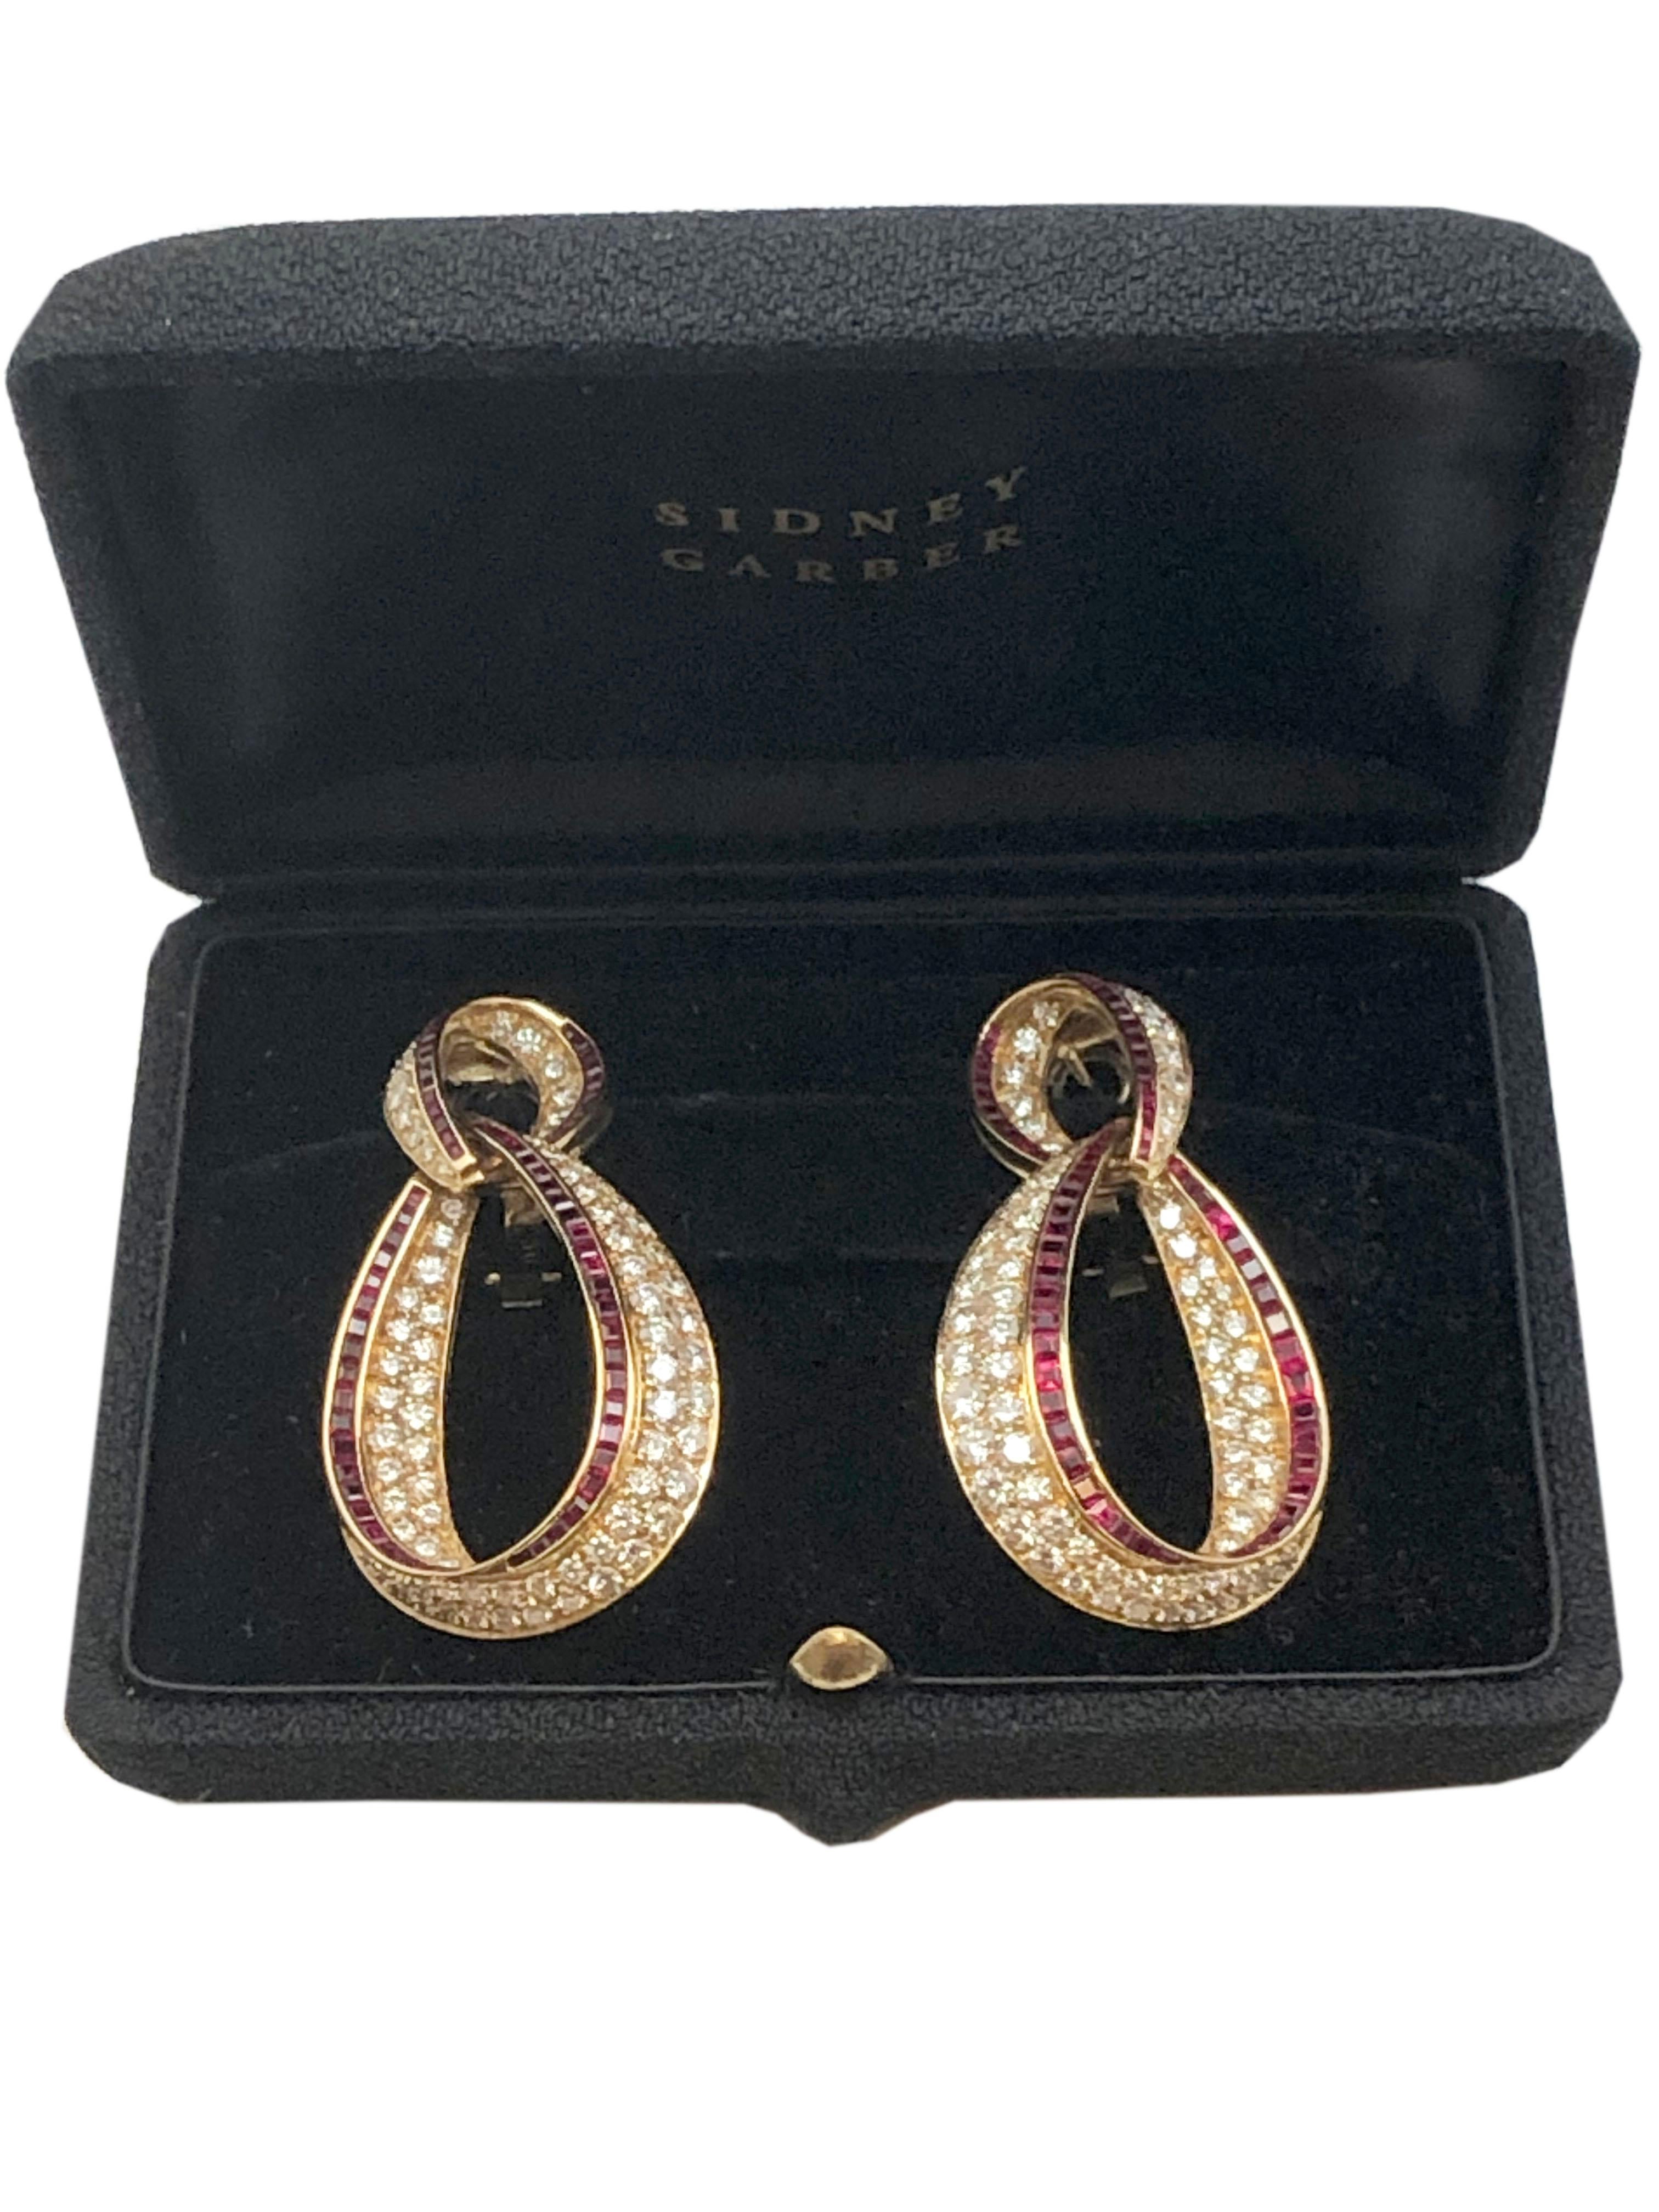 Sidney Garber Yellow Gold, Diamond and Ruby Large Inside Out Dangle Hoop Earring For Sale 1